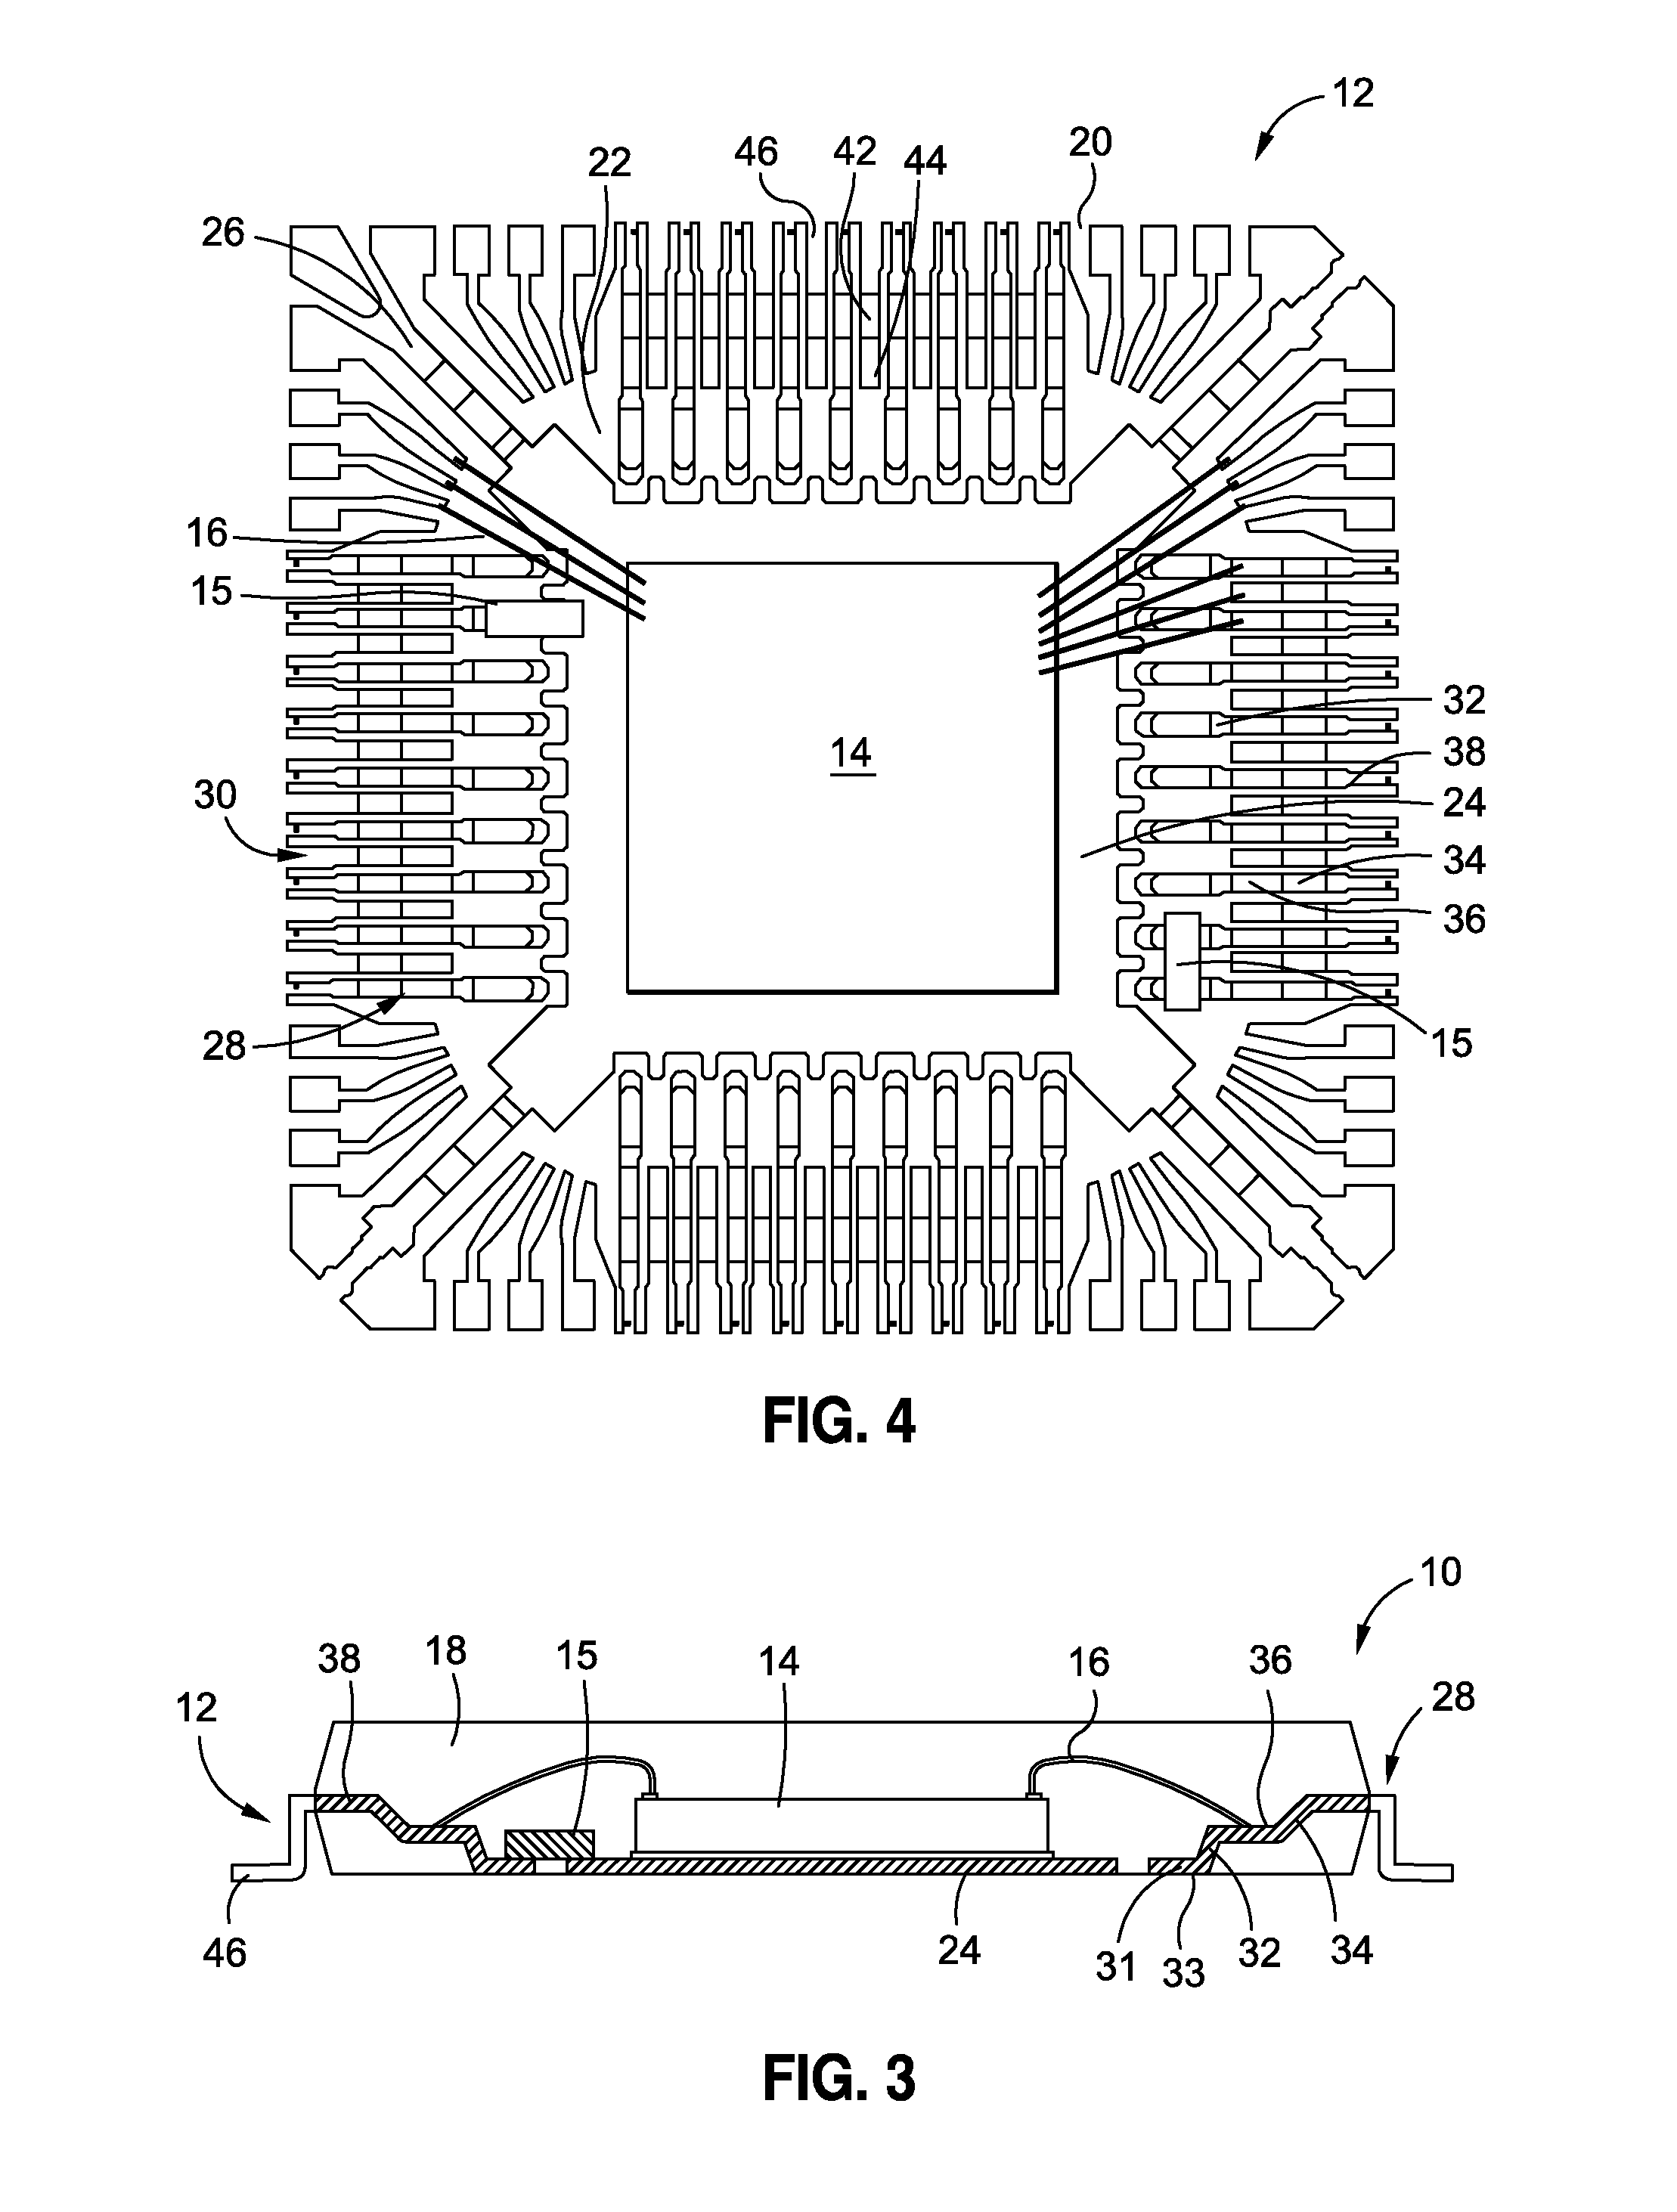 Semiconductor device with increased I/O leadframe including passive device